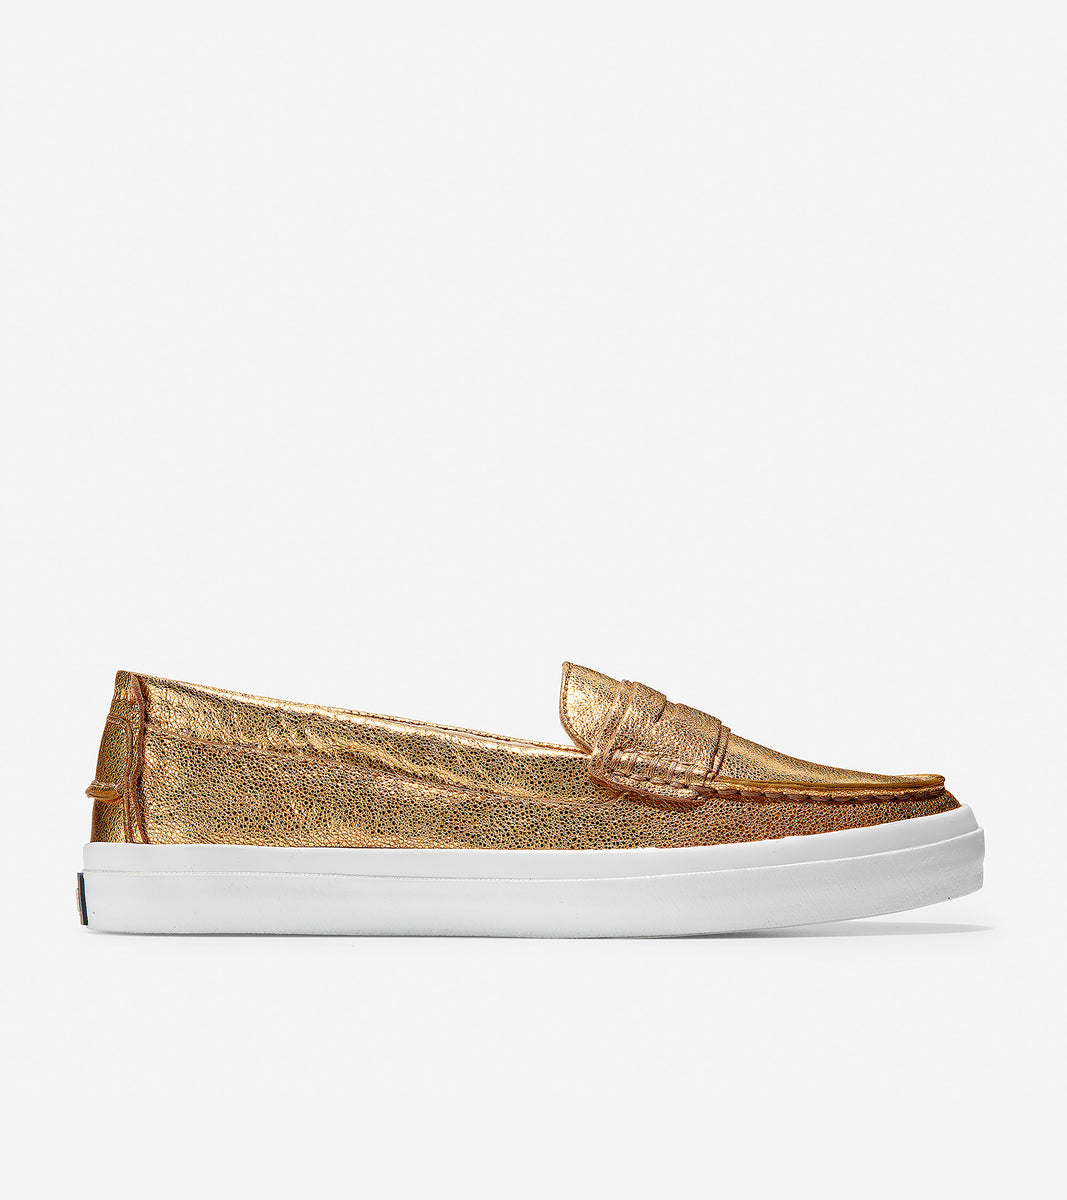 ColeHaan-Pinch Weekender LX Loafer-w10898-Gold Leather